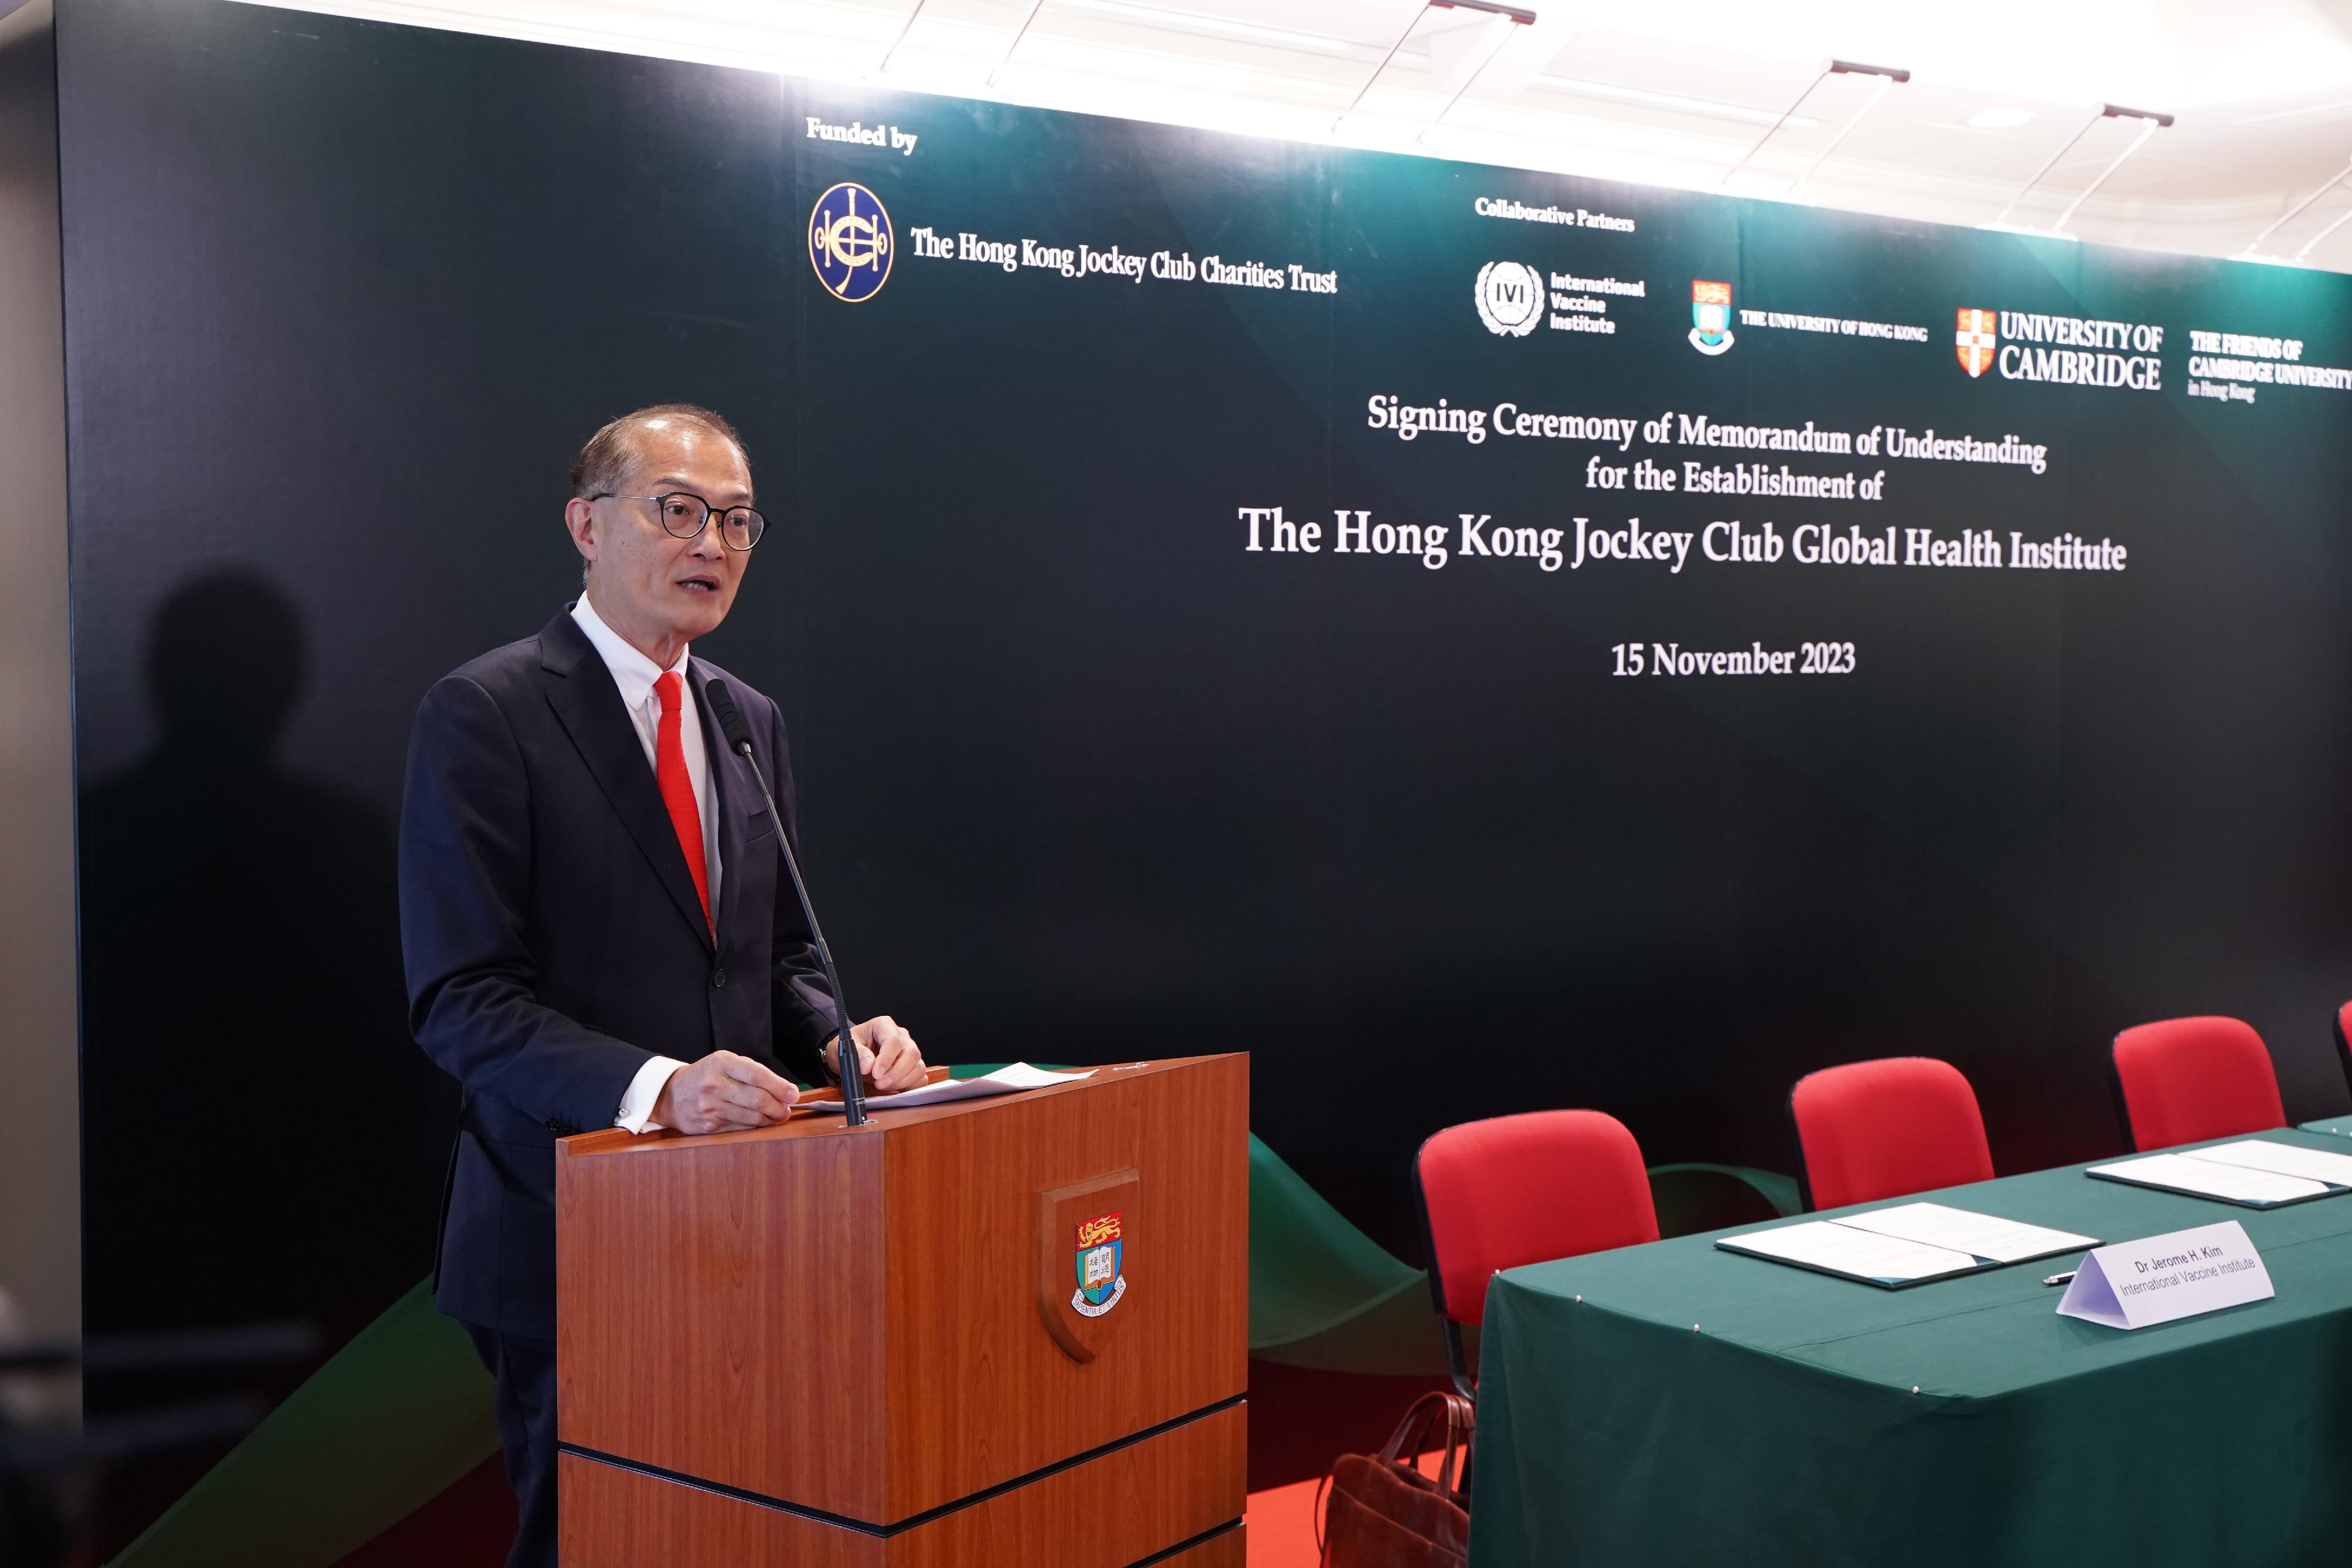 The Secretary of Health, Professor Lo Chung-mau, delivers a speech at the signing ceremony of a Memorandum of Understanding for the establishment of the Hong Kong Jockey Club Global Health Institute today (November 15).
